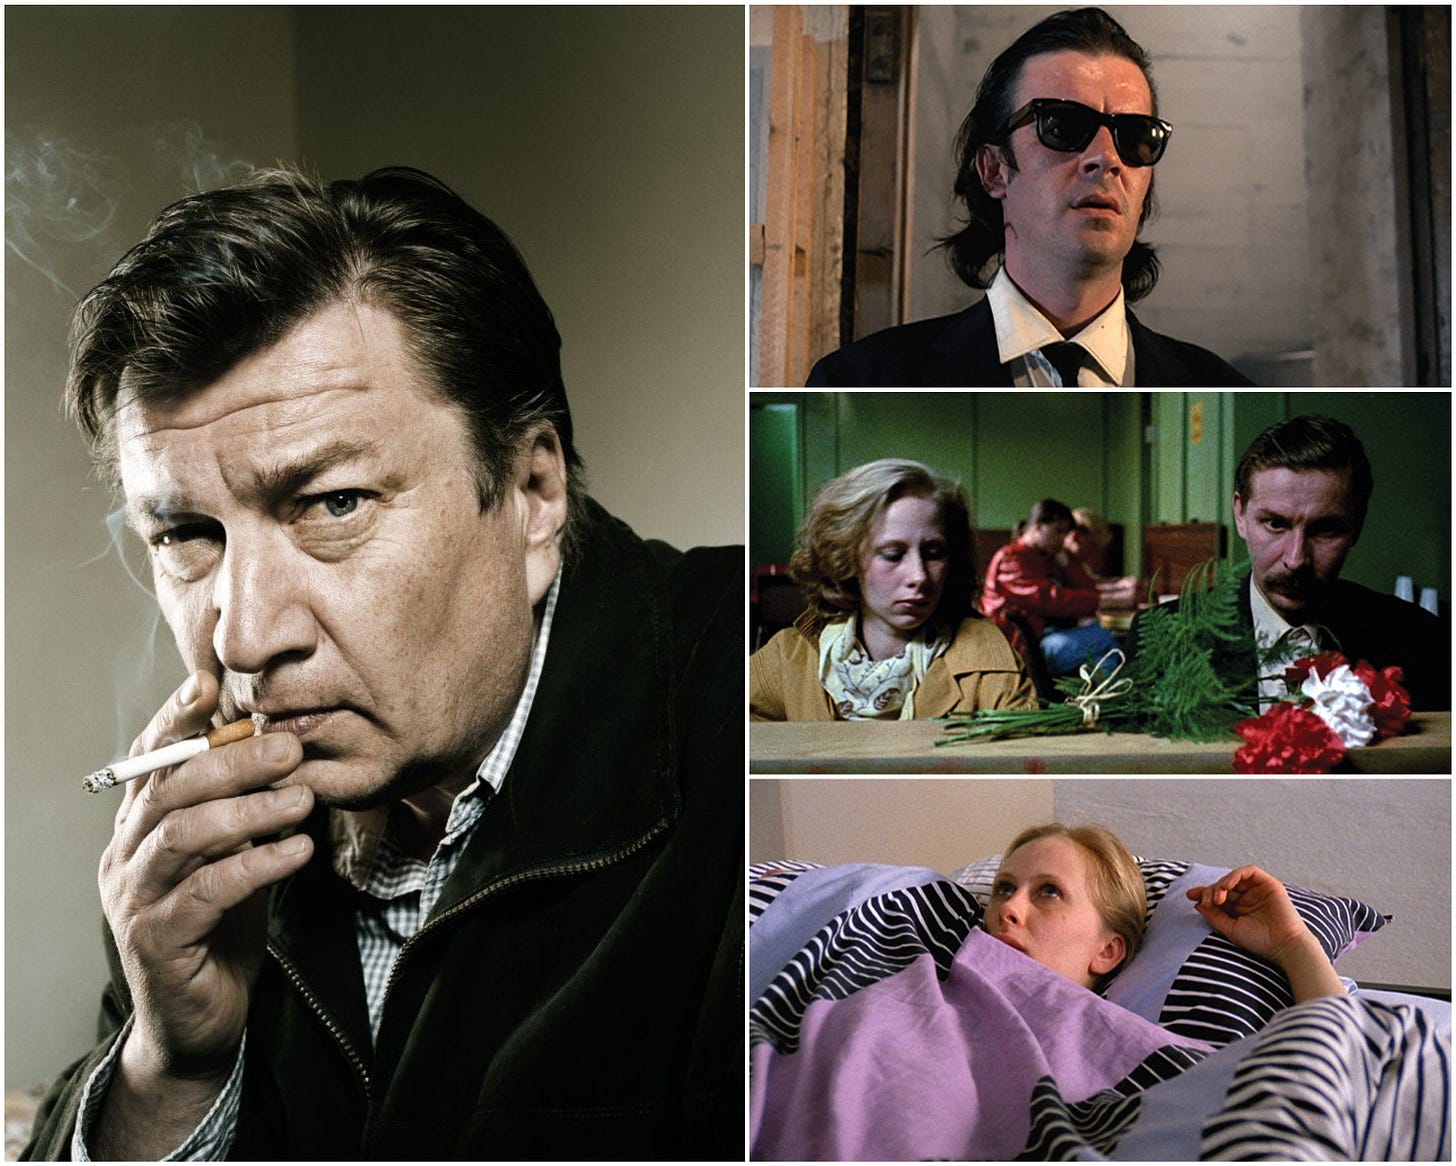 Film Forum on X: "Finnish master Aki Kaurismäki's Proletariat Trilogy  screens today in #35mm courtesy Finnish Film Foundation - SHADOWS IN  PARADISE (12:30, 6:00), ARIEL (2:05, 7:35), and THE MATCH FACTORY GIRL (